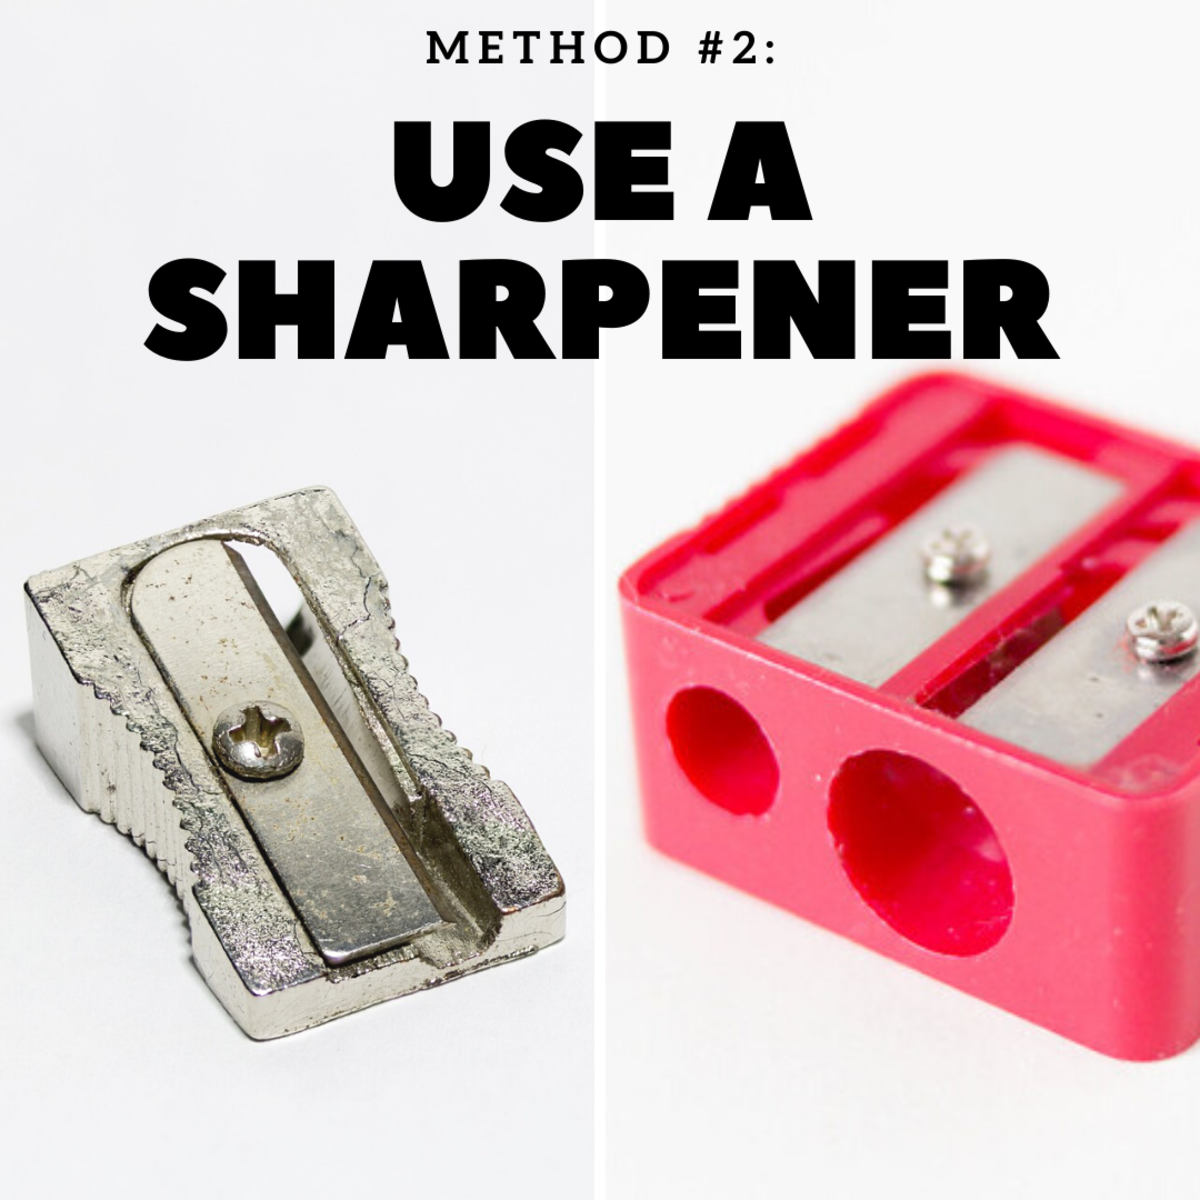 Learn which sharpeners are good for crayons.